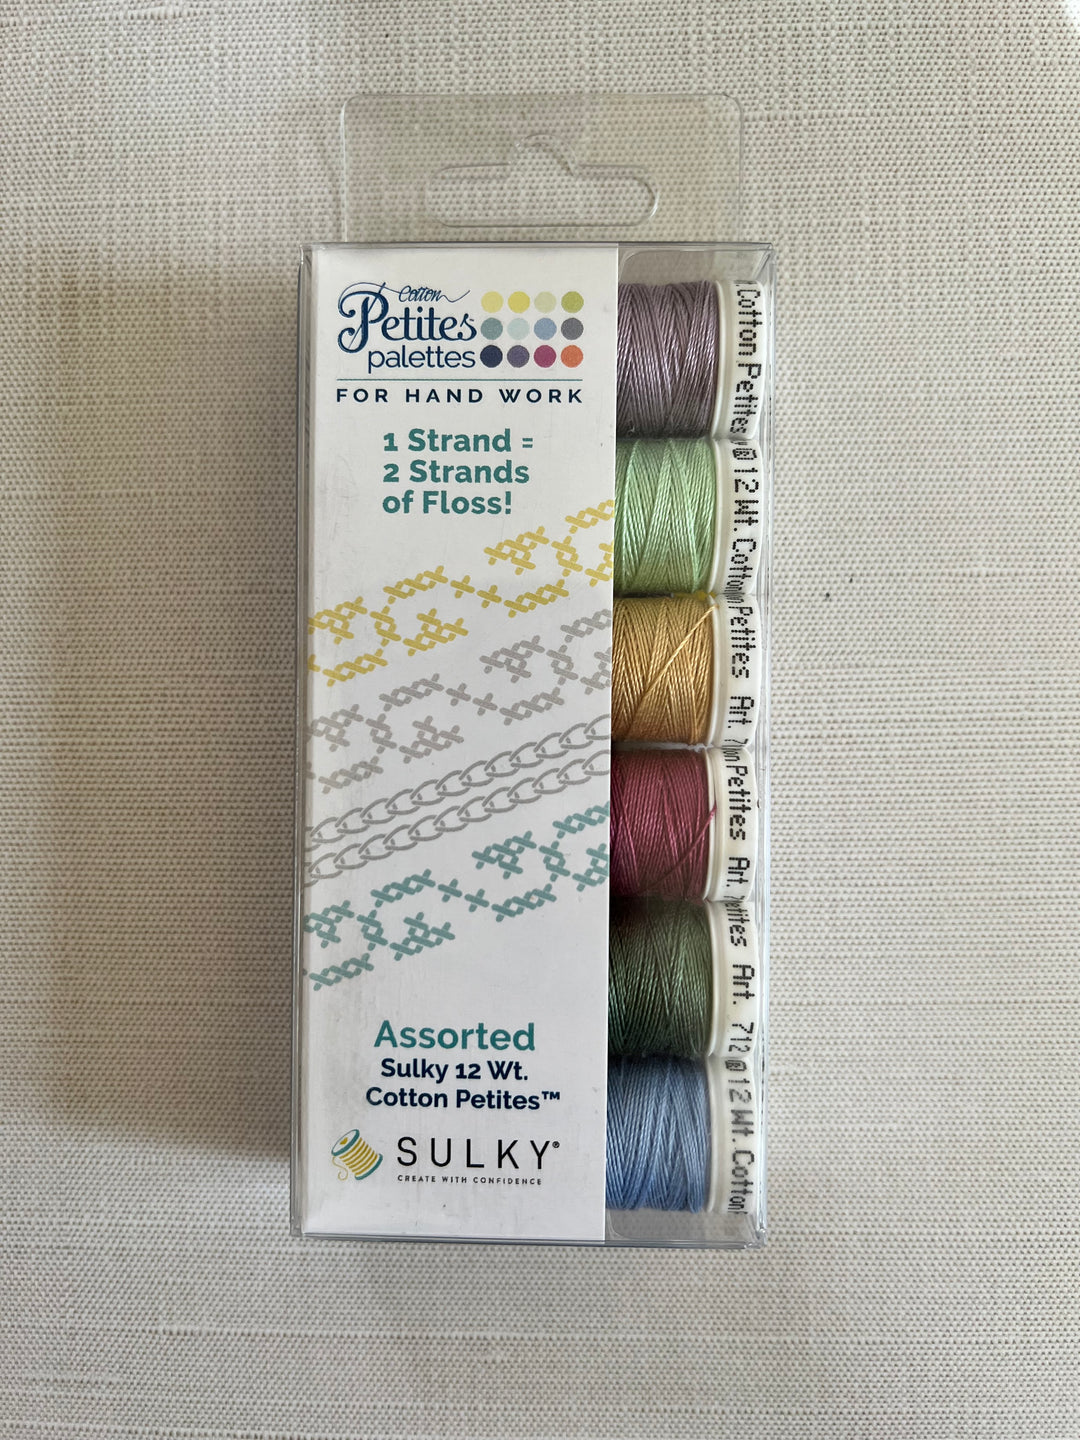 Rosewood Manor Sampler - Sulky Cotton Petites Palettes